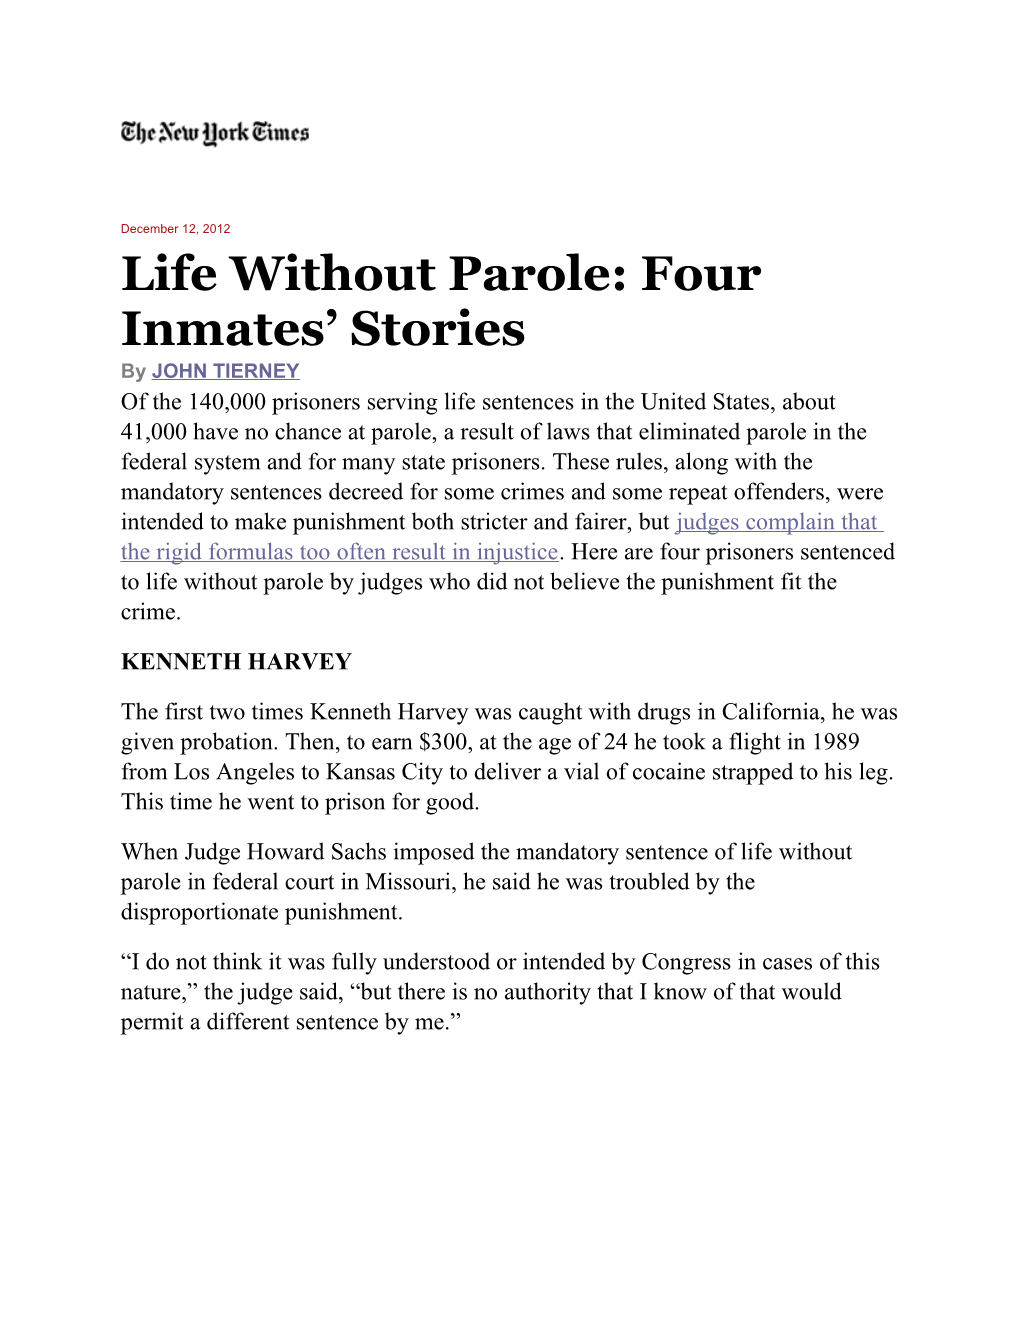 Life Without Parole: Four Inmates Stories